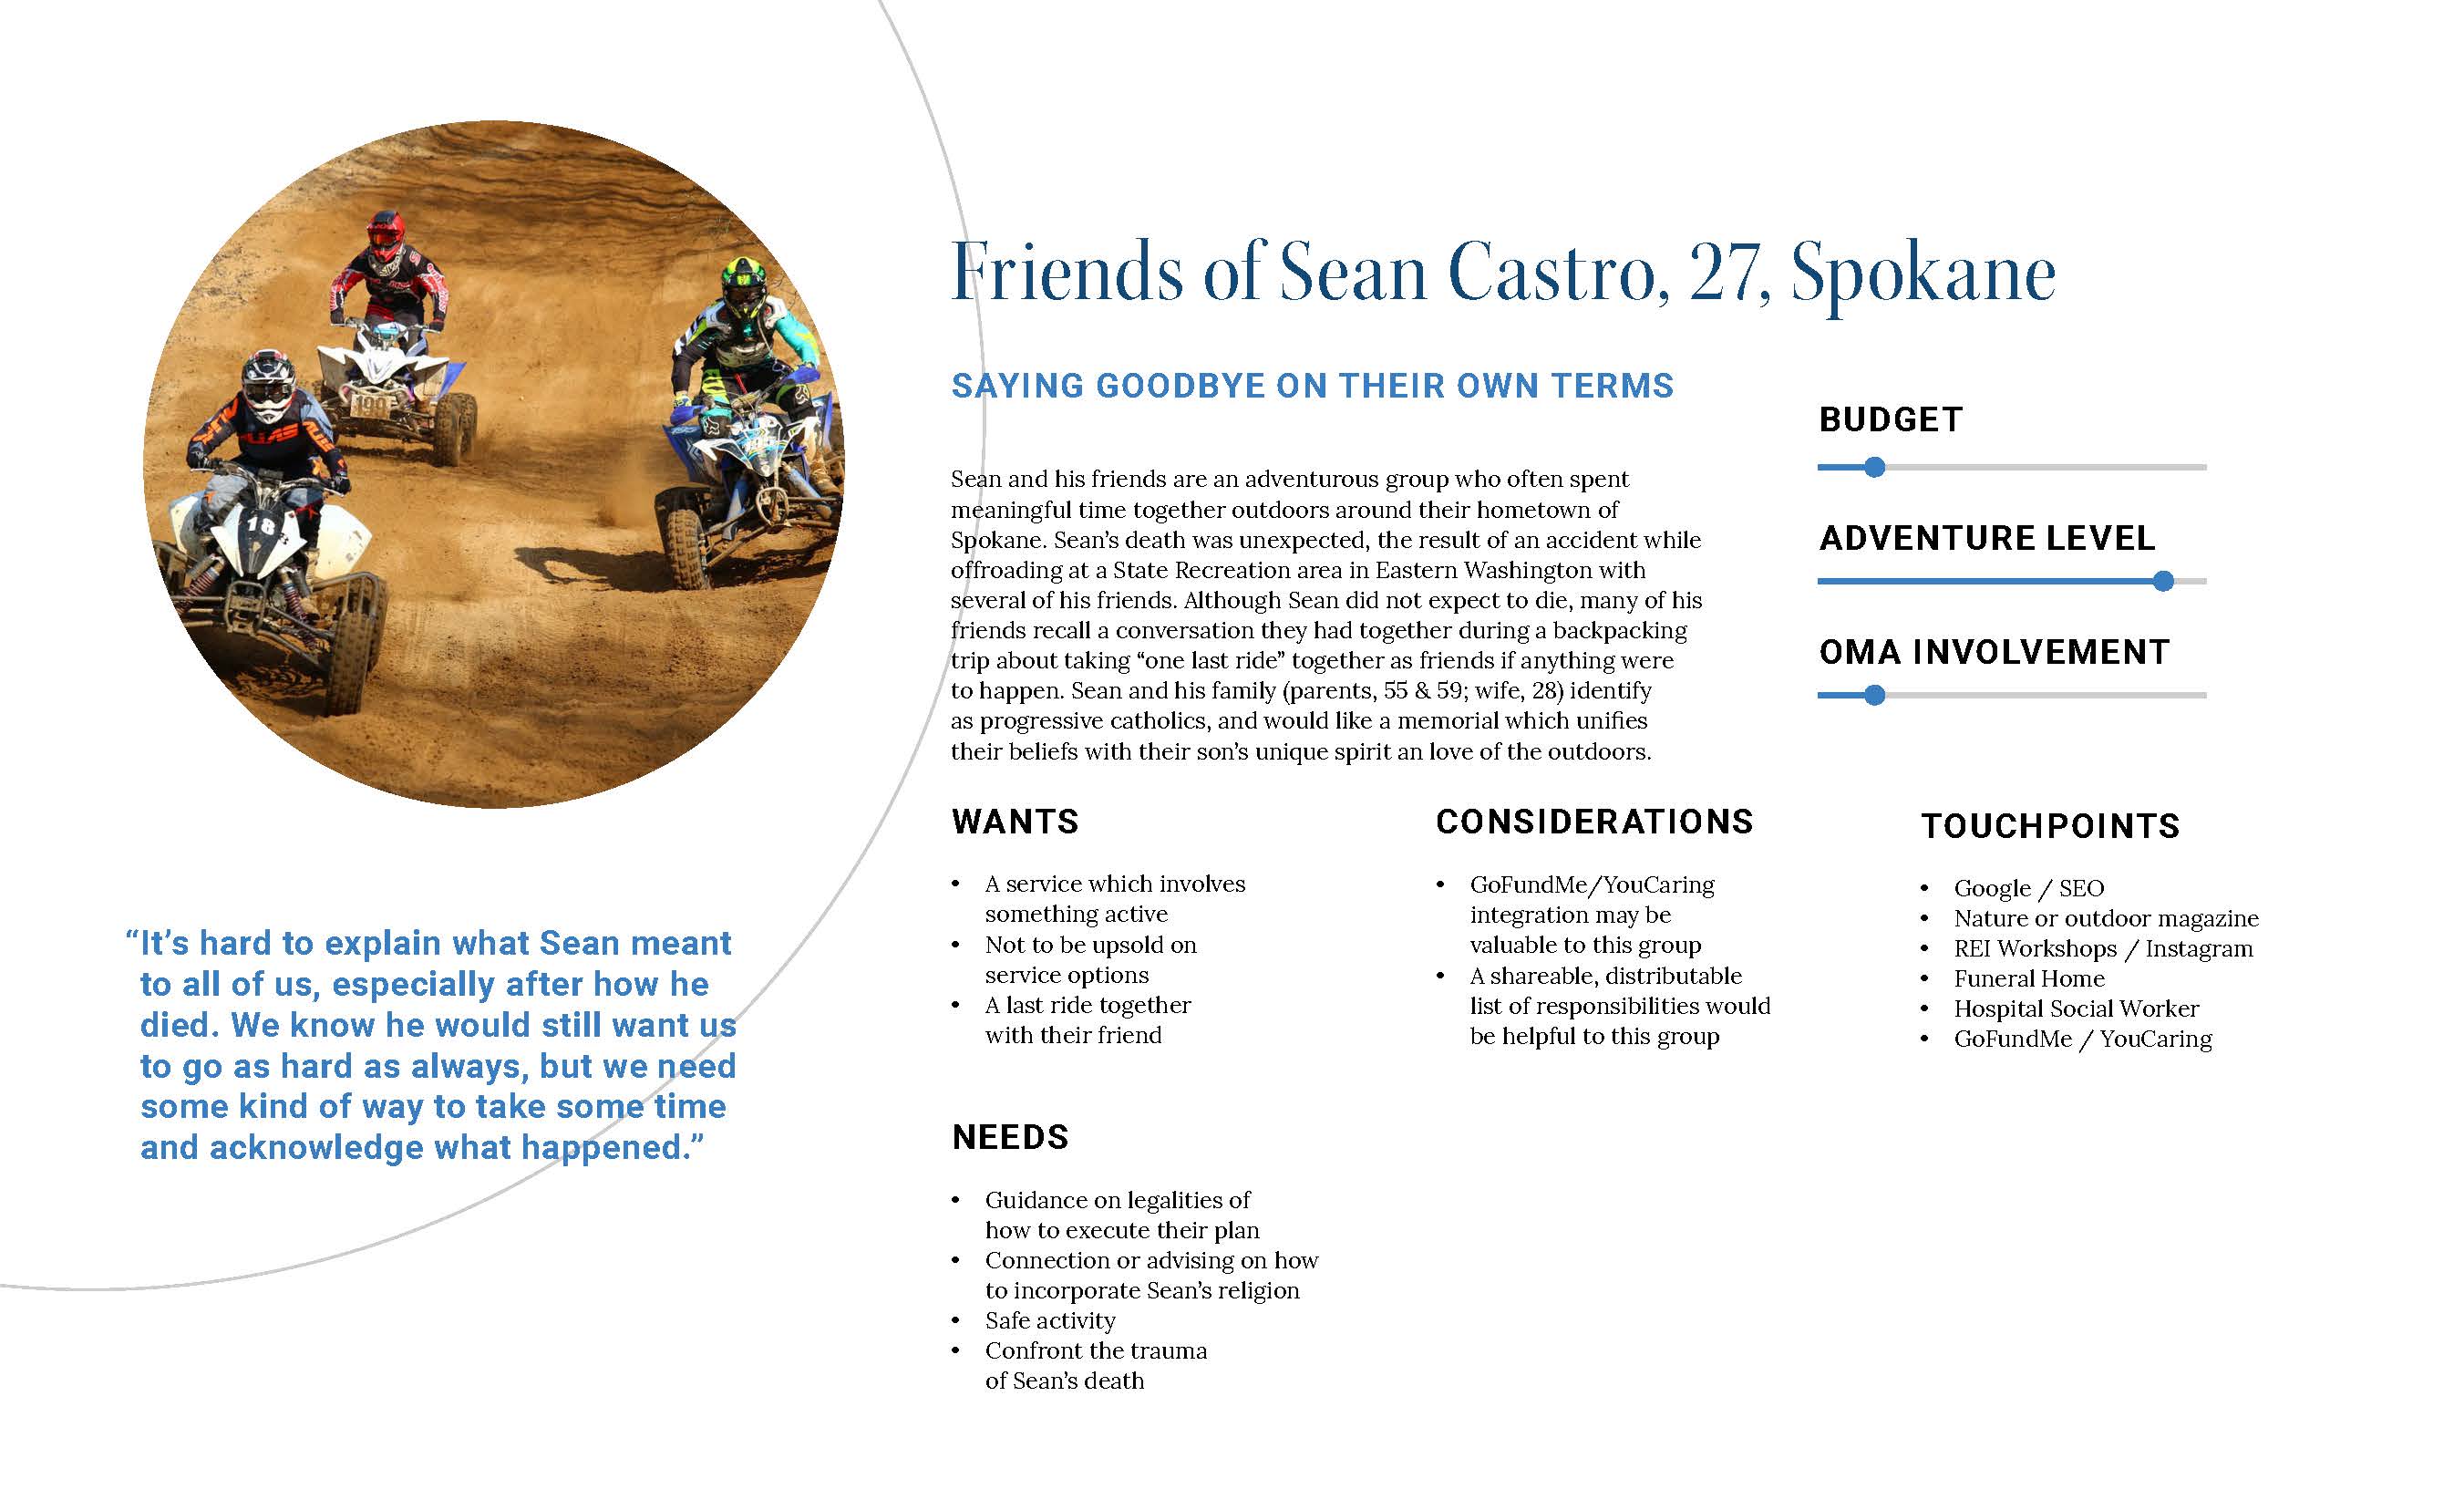 Persona profile for friends of Sean Castro, looking to honor their deceased friend with one last ride together.